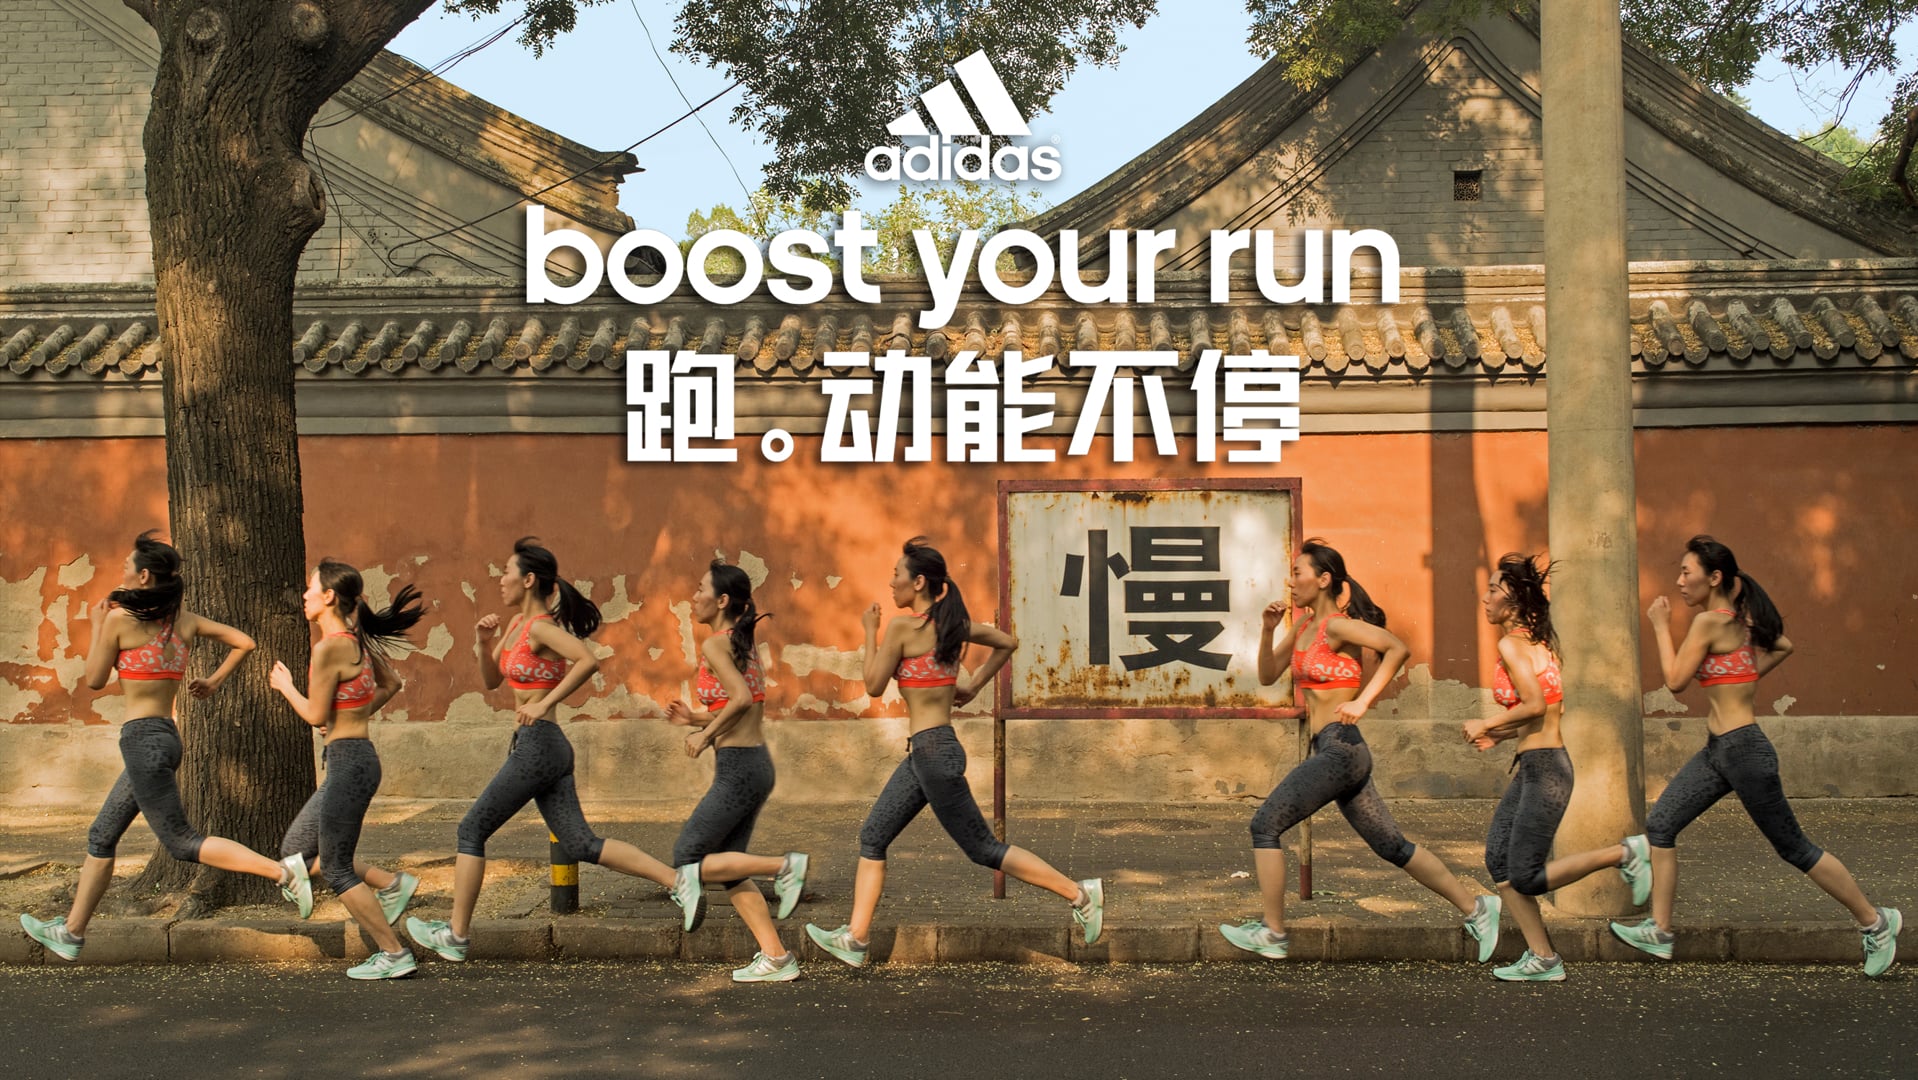 Adidas - your run campaign on